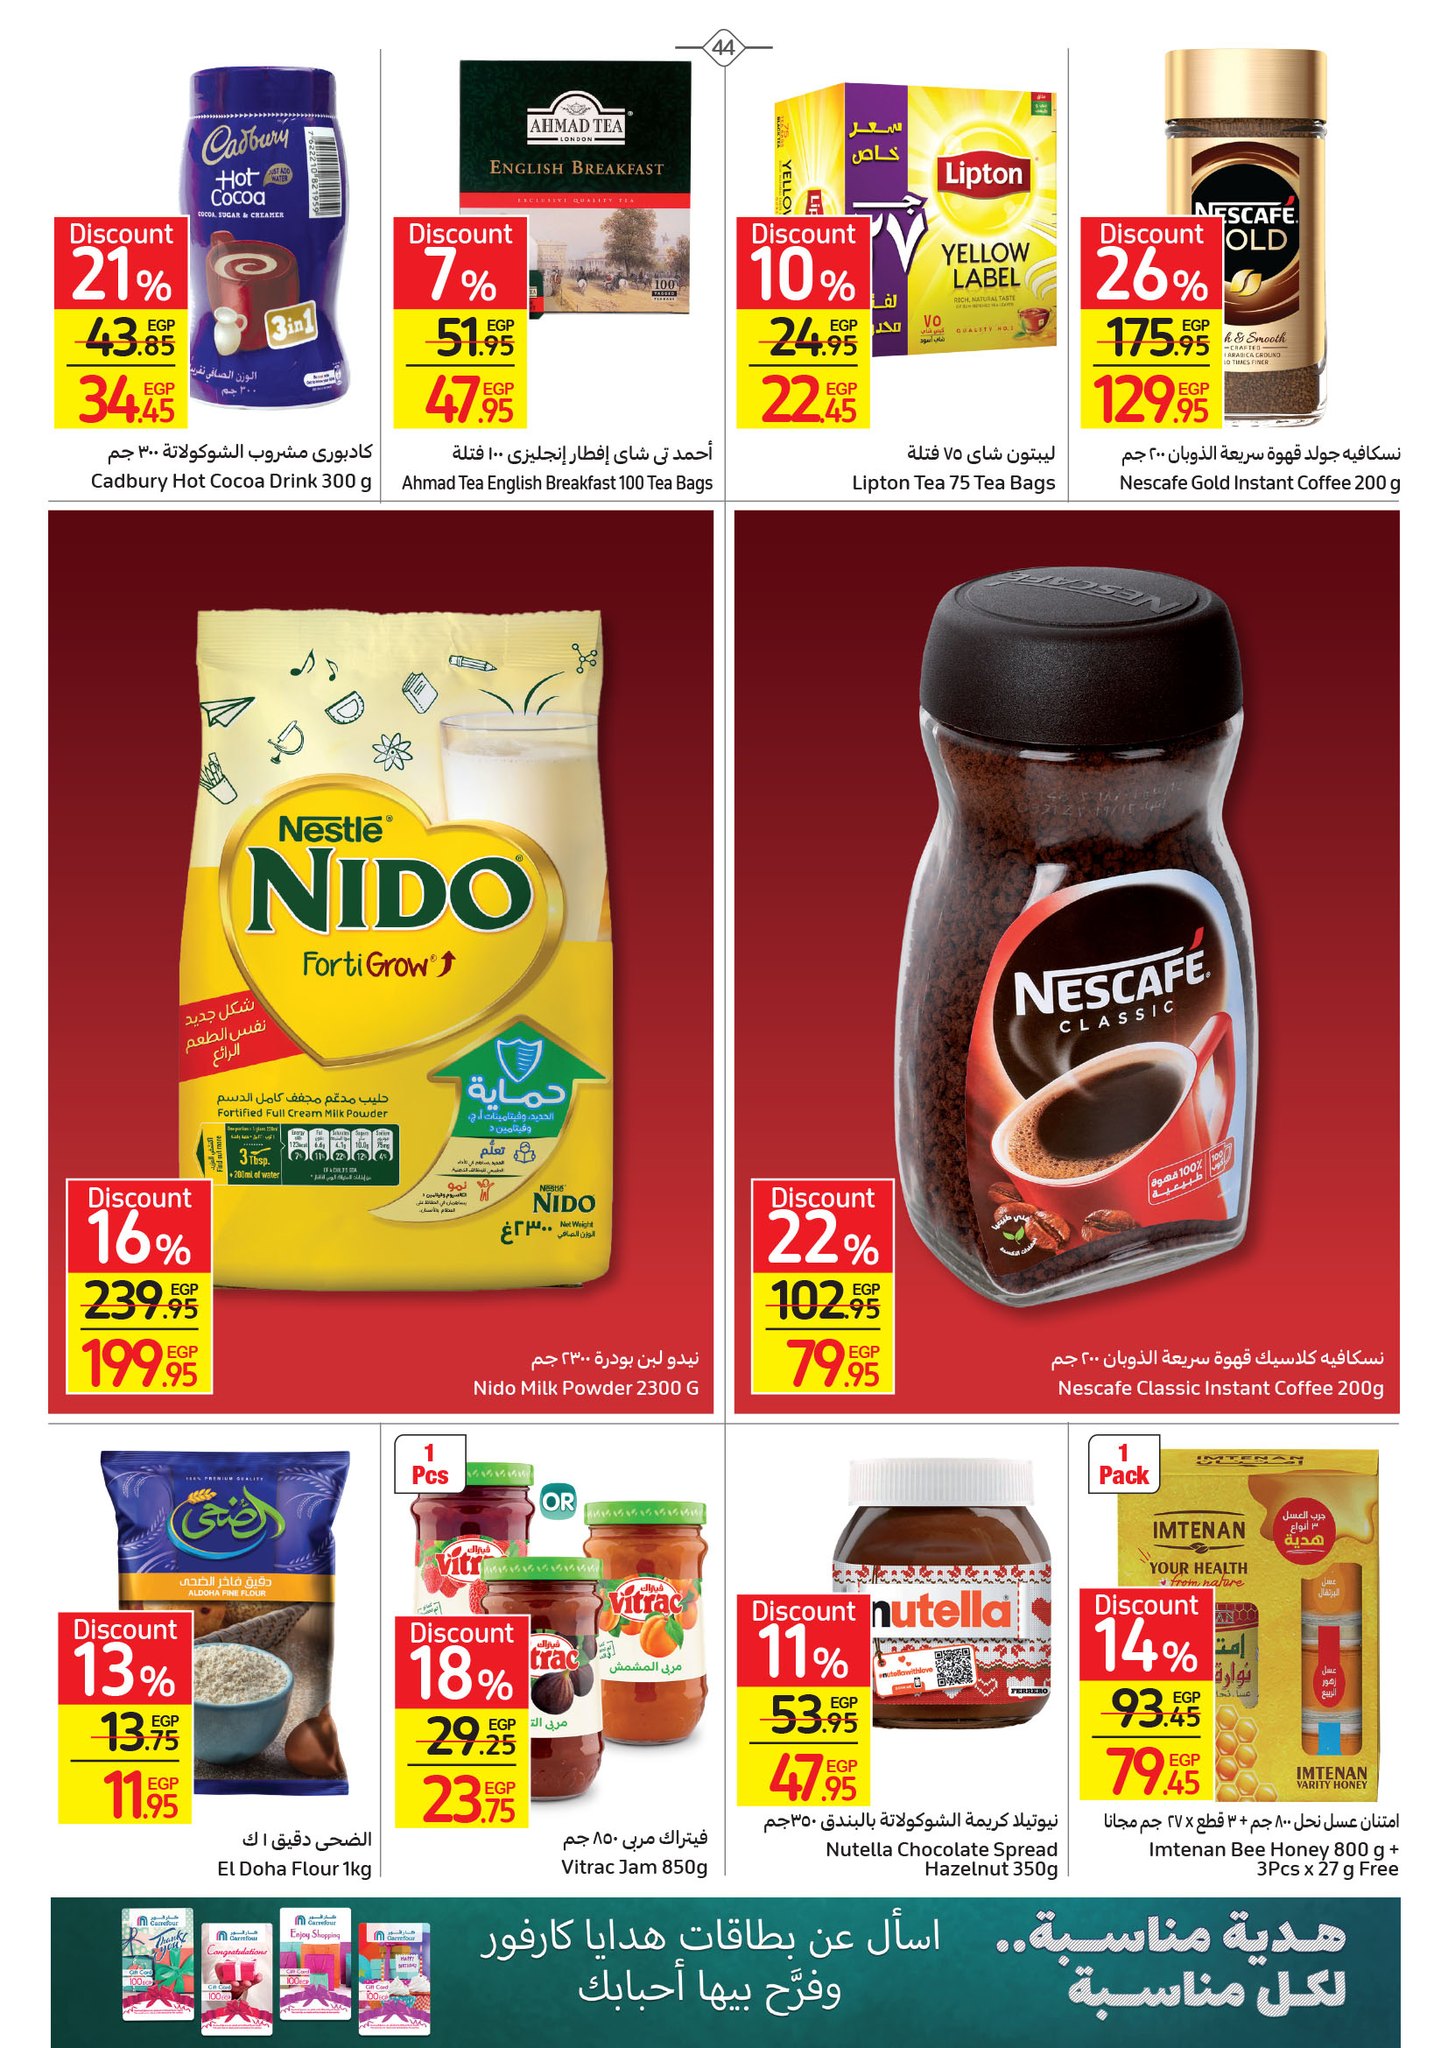 Watch the latest Carrefour half price offers "Last Chance Offer" until December 4th 44